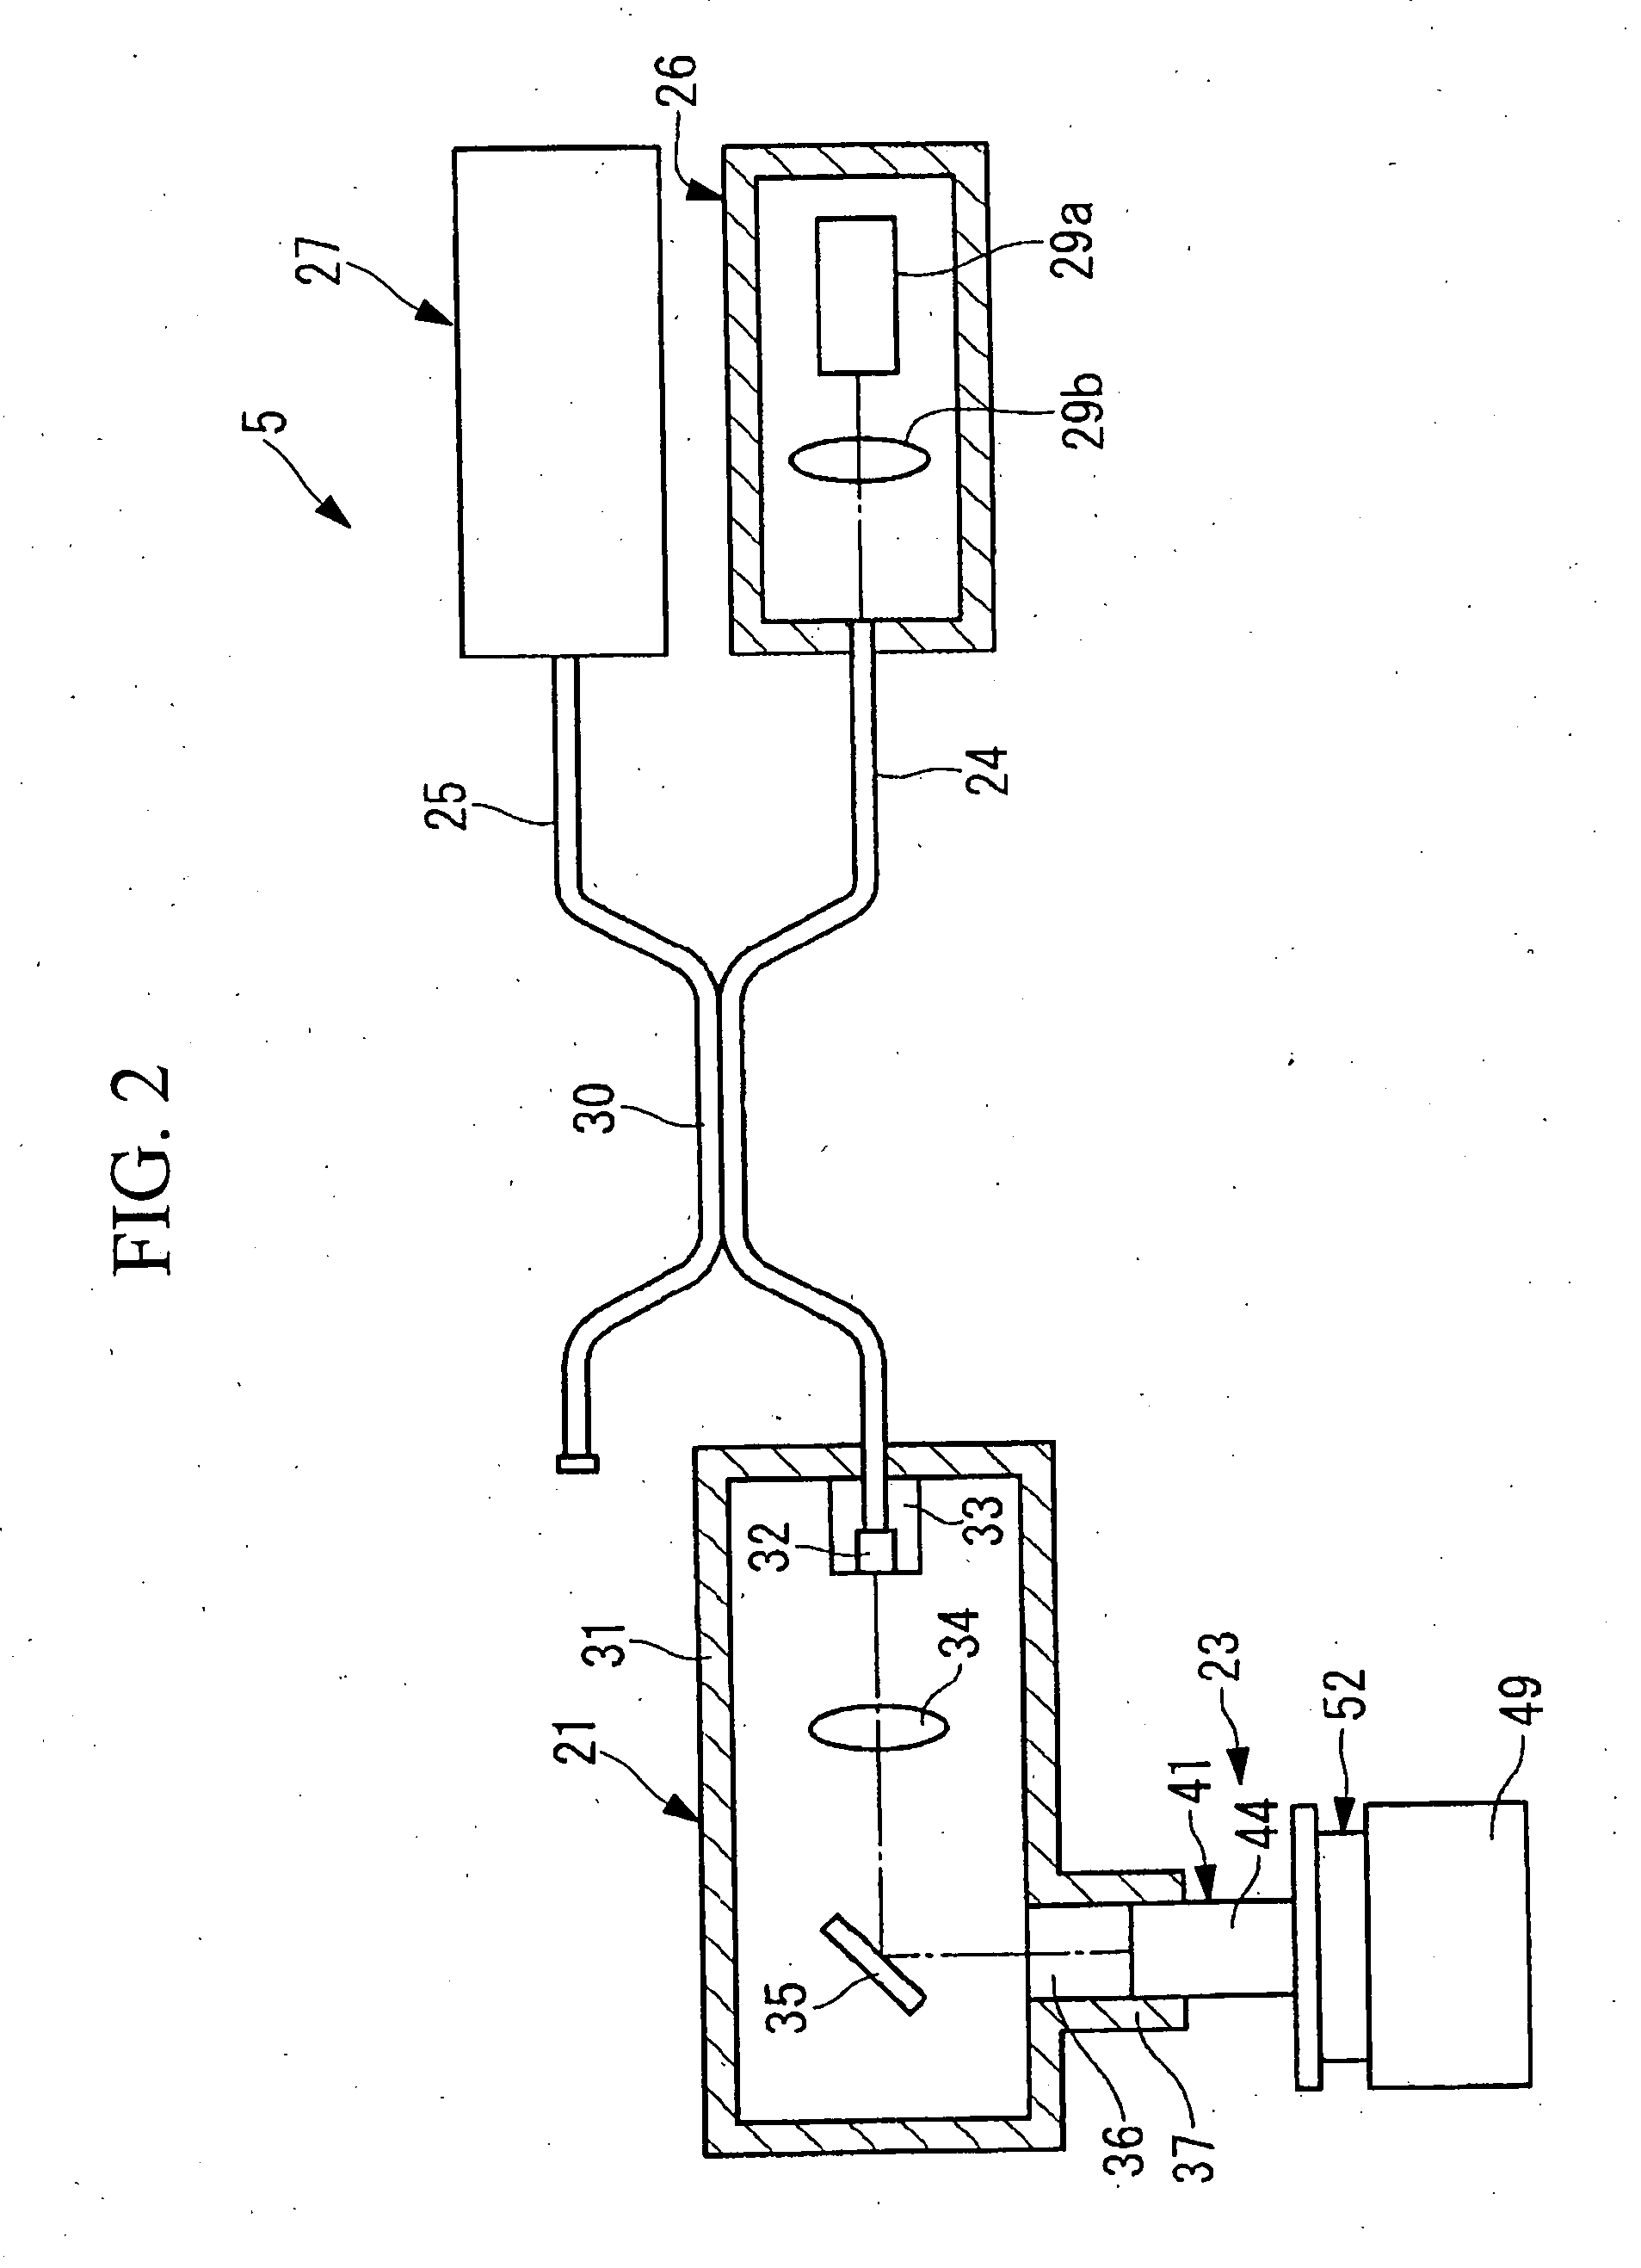 Objective lens unit, objective lens insertion tool, microscope, objective optical system fixing device, and microscope system